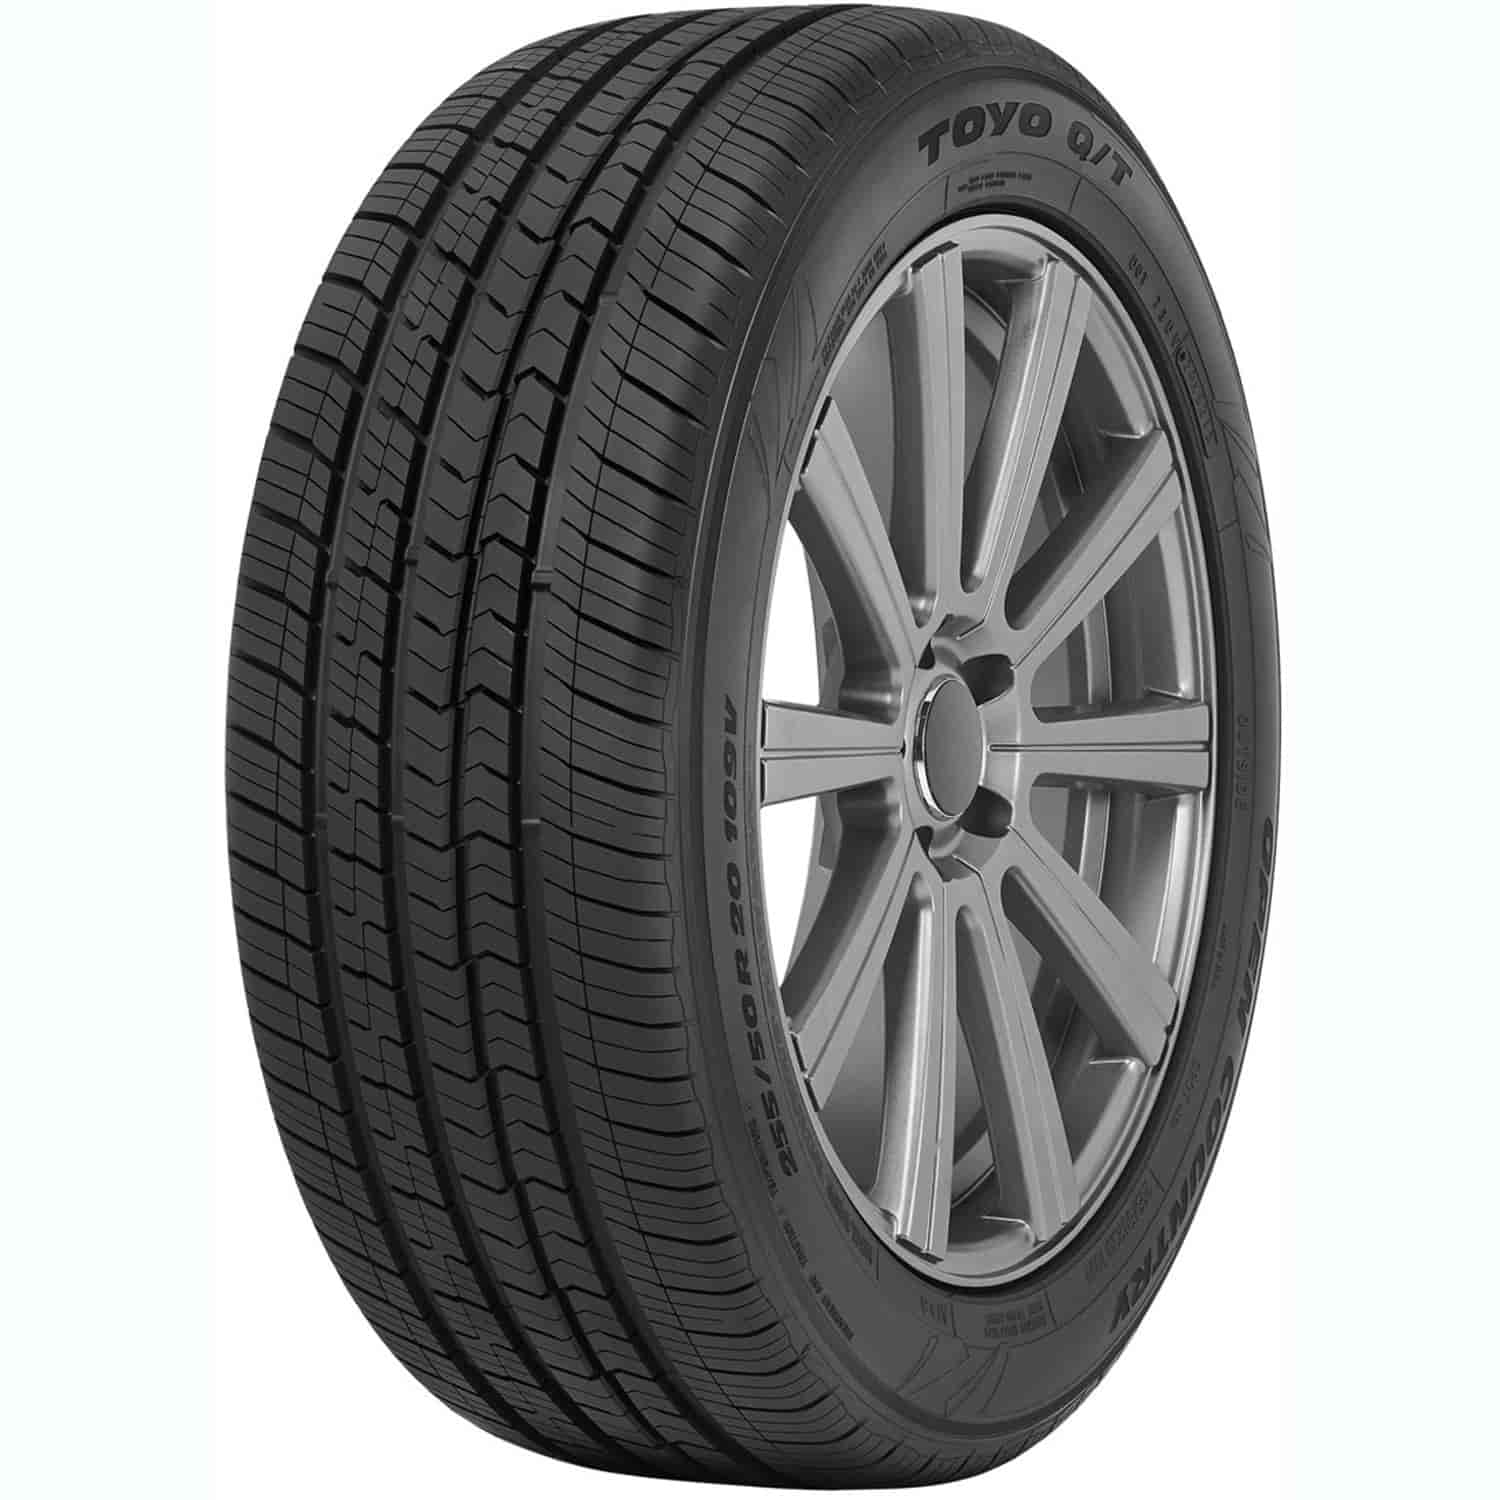 OPEN COUNTRY Q/T 255/55R18 109V